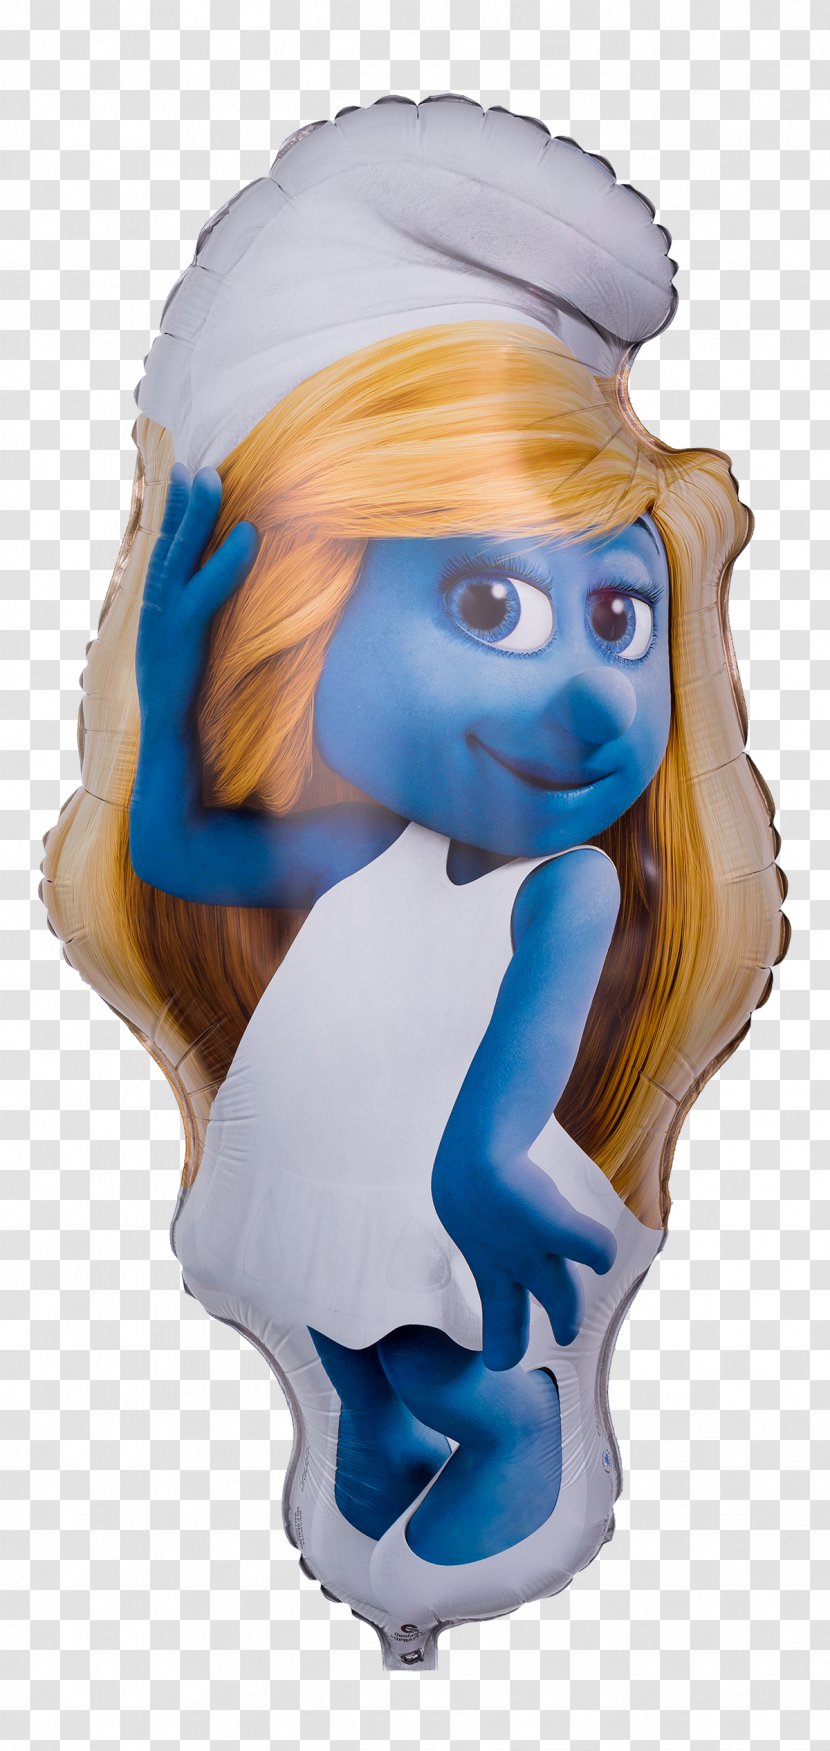 The Smurfette Toy Balloon Gift Child - Neonate Transparent PNG